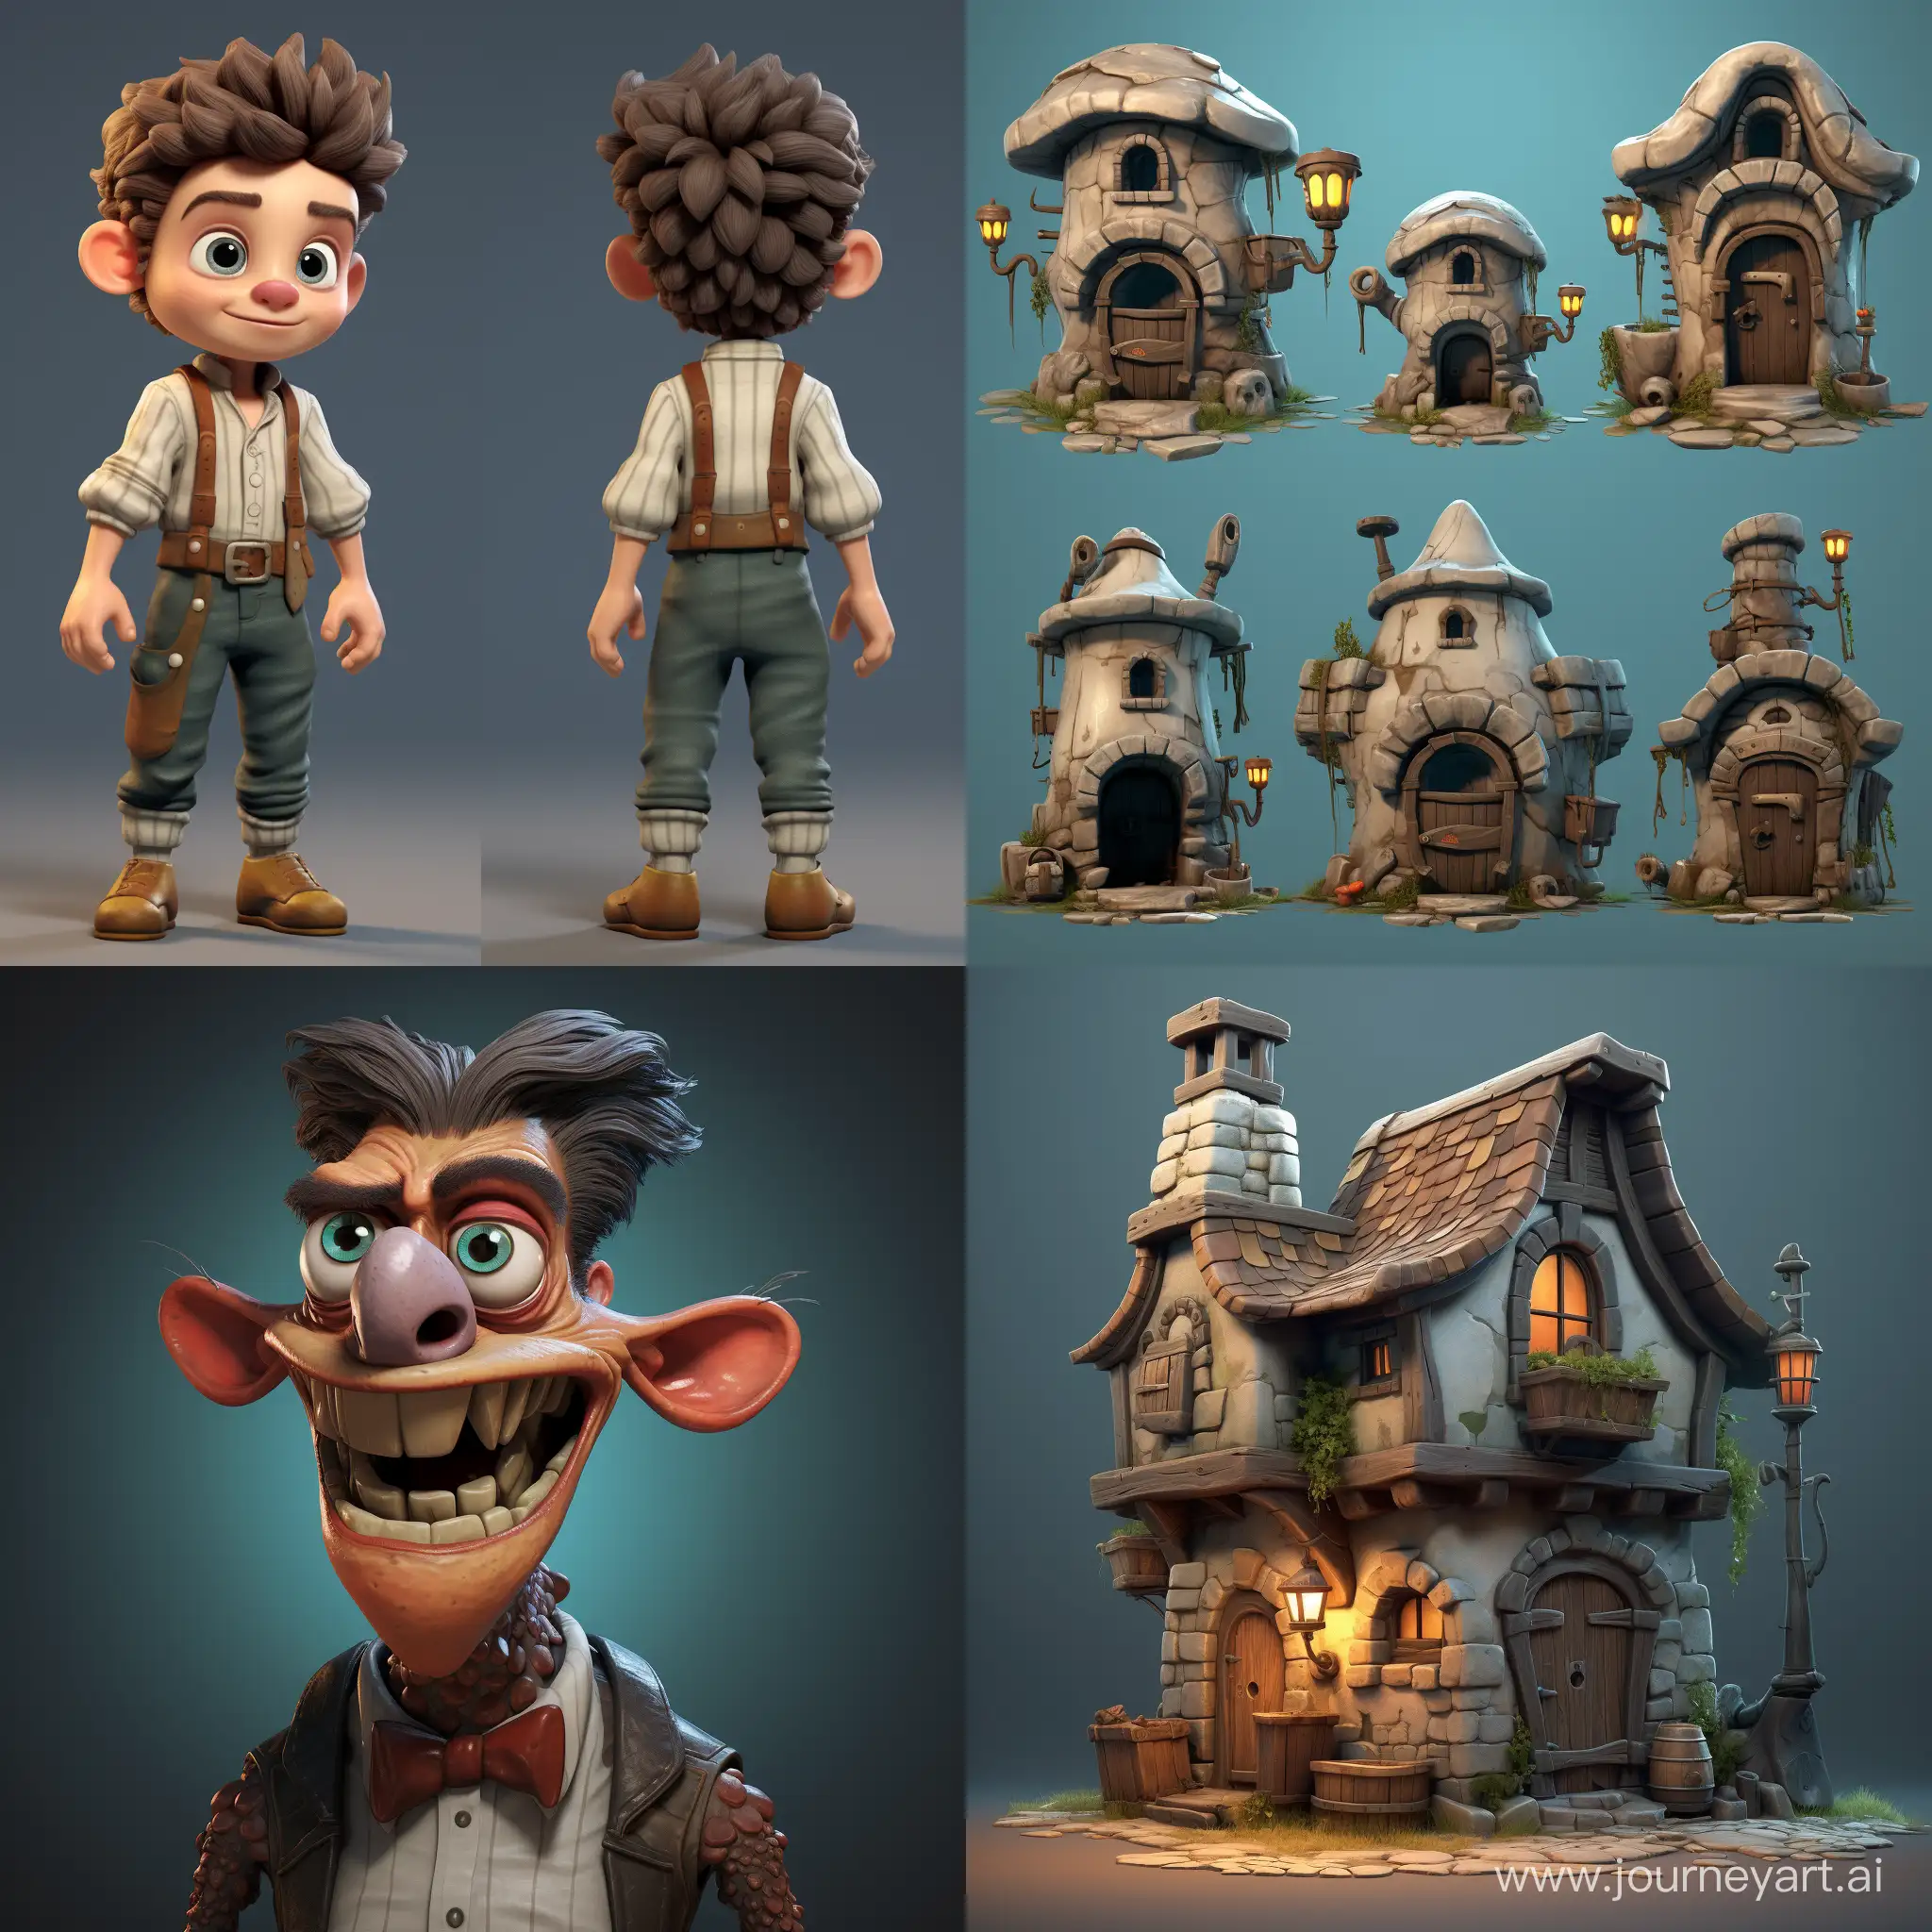 Wells，cartoon characters, game material